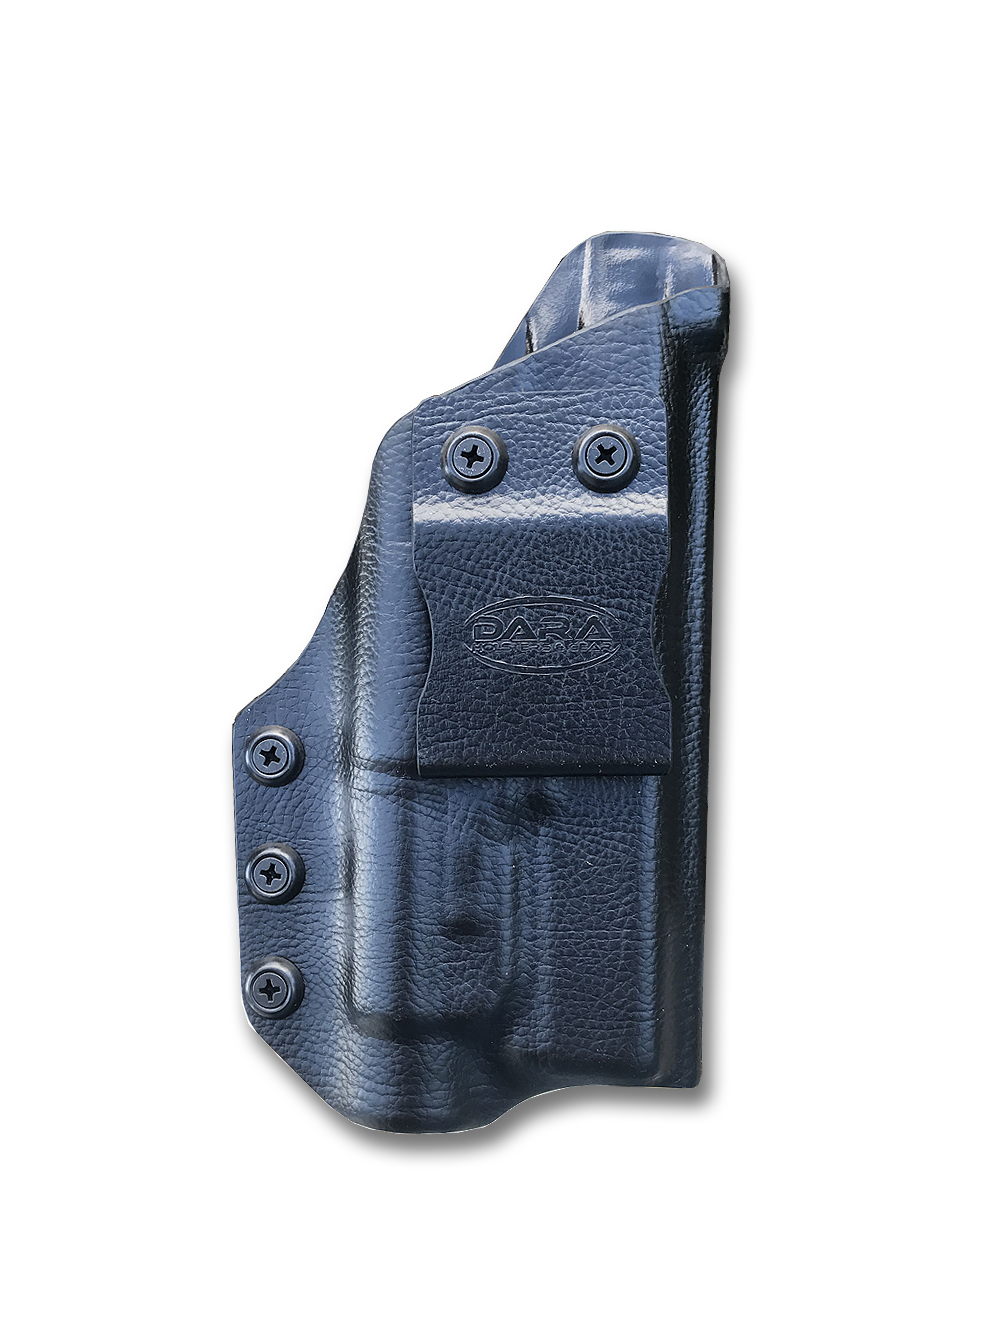 Glock 17 with TLR-1 IWB Holster